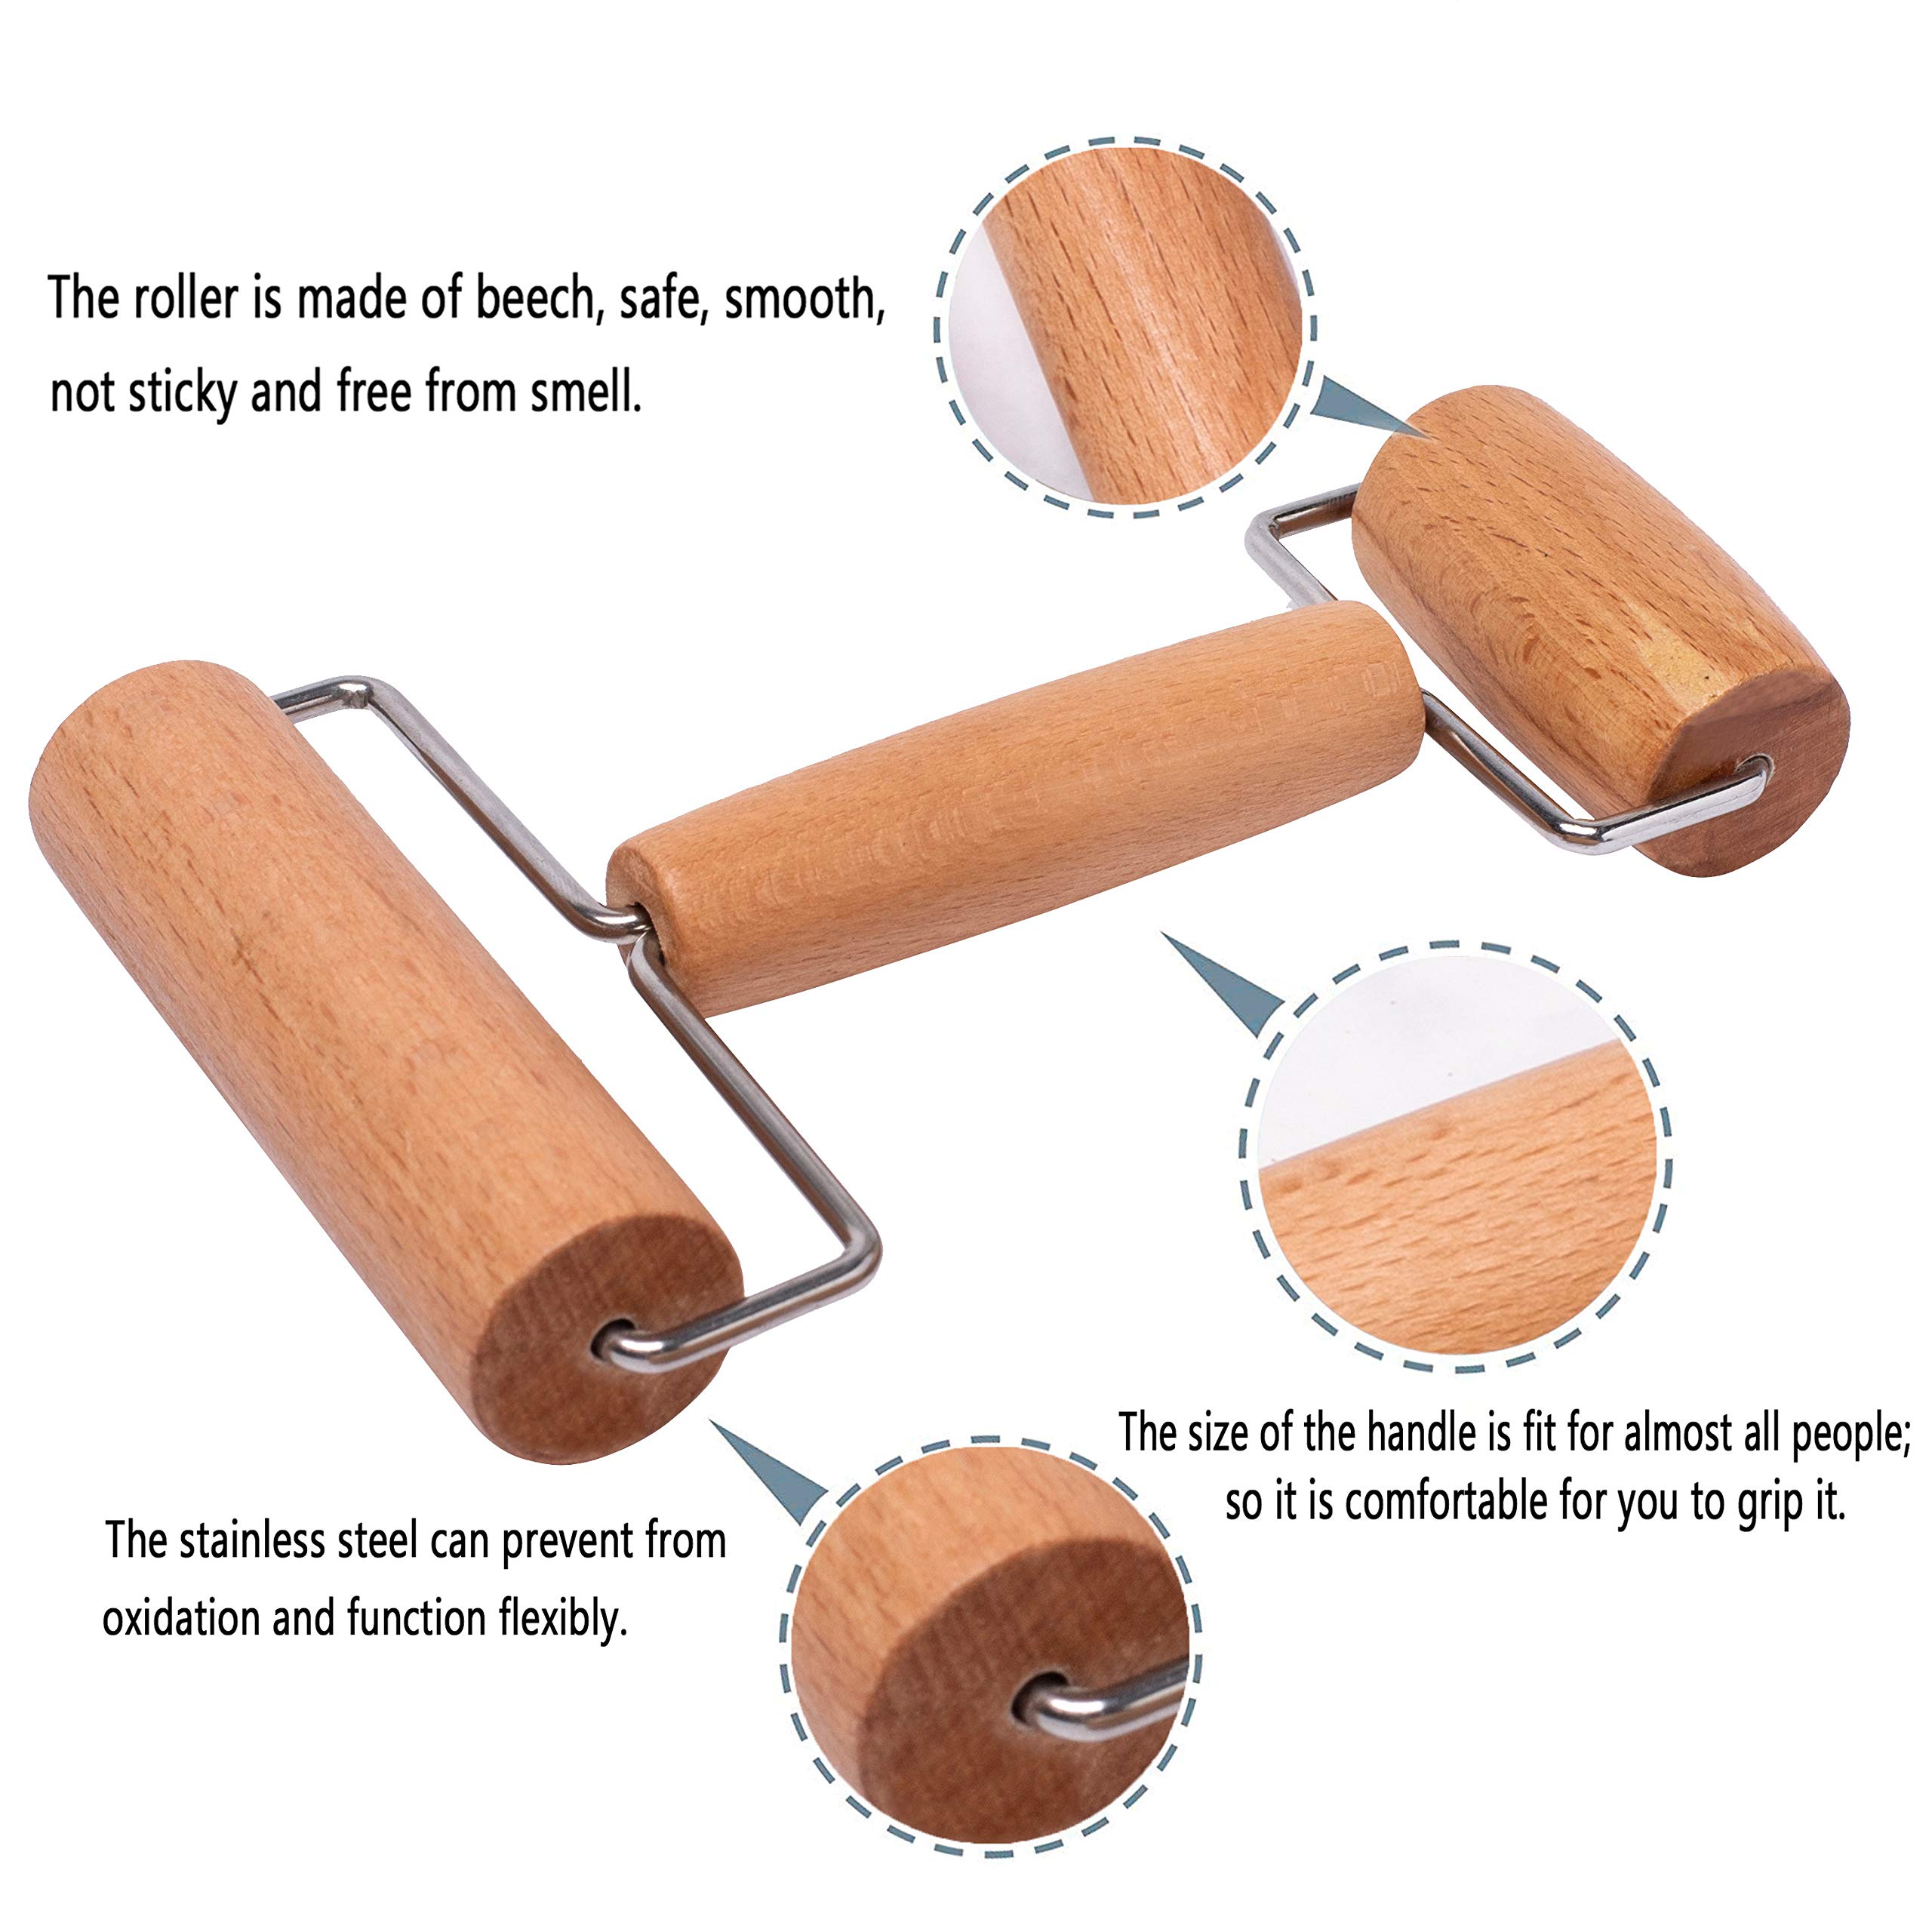 Whaline Wood Pastry Pizza Roller 2 Pieces Non Stick Wooden Rolling Pin for Home, Kitchen Baking Cooking Easy to Handle (T-Maple and H-Maple)